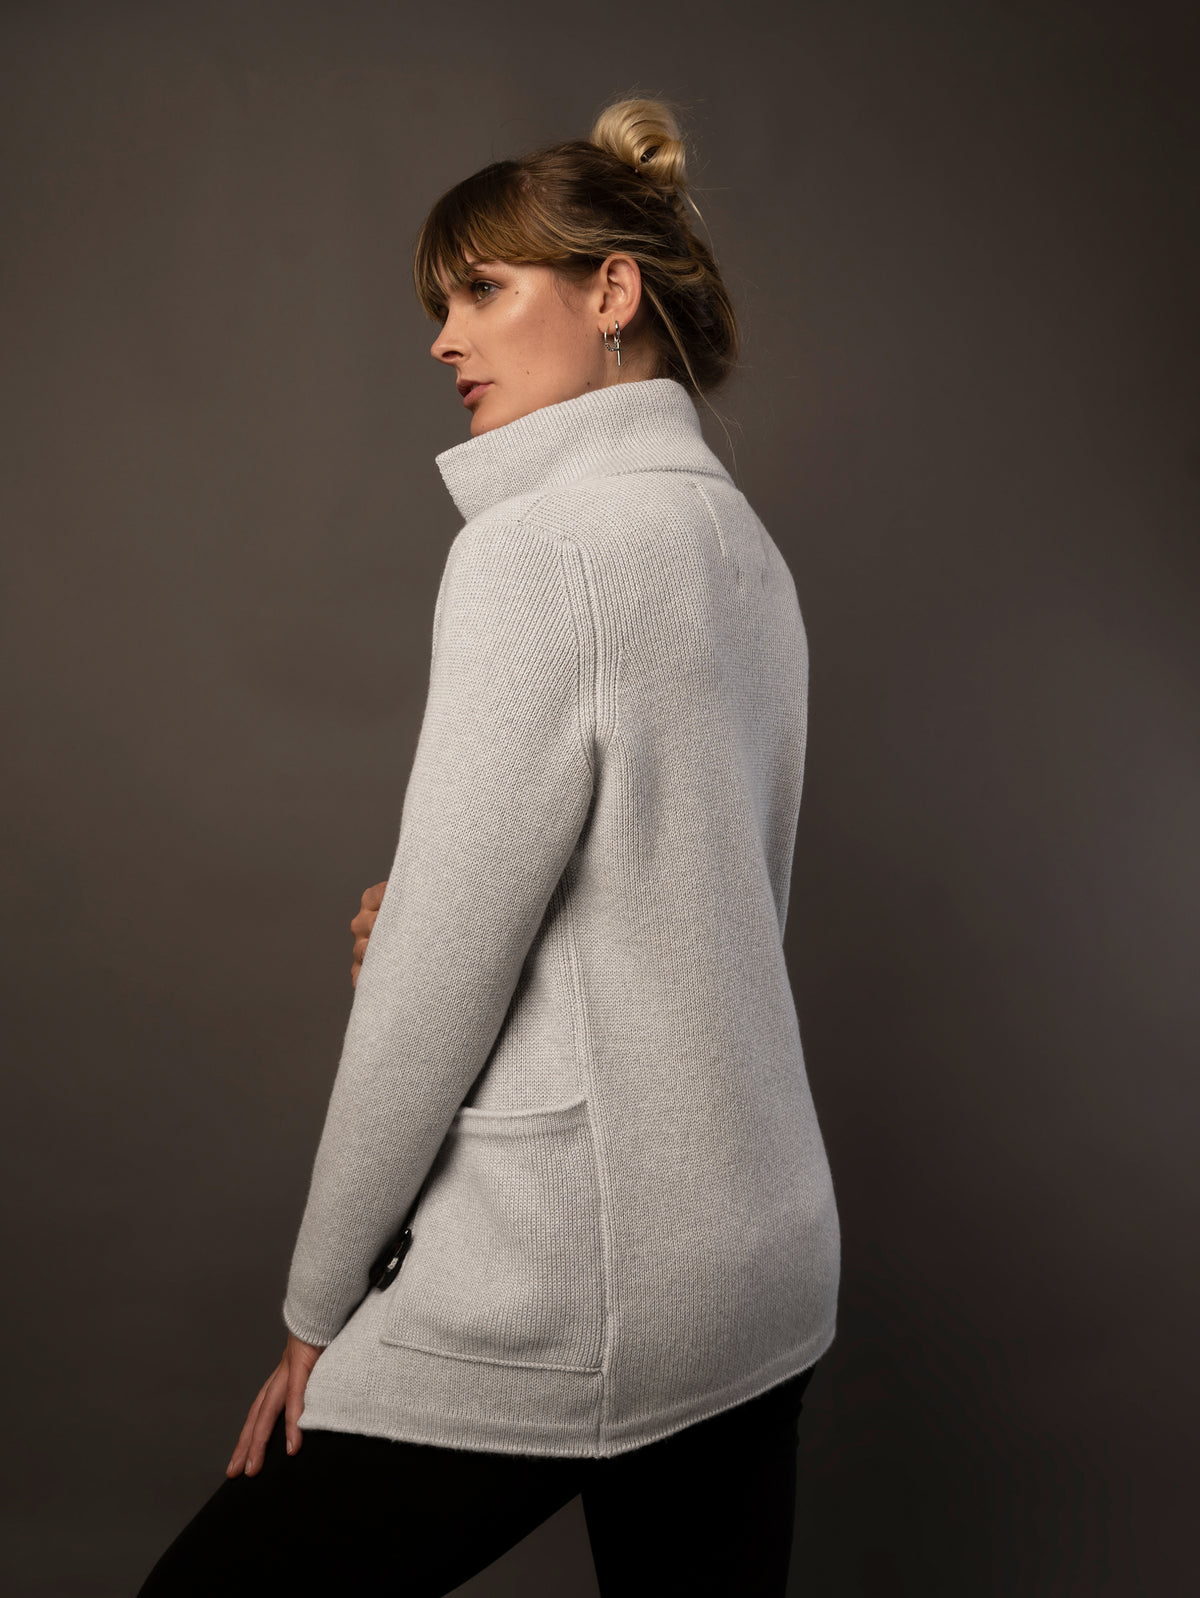 Ladies Cashmere Duffle Coat in Light Grey. 100% cashmere handmade under the Royal Warrant in the UK. This is Cashmere at it&#39;s finest. 